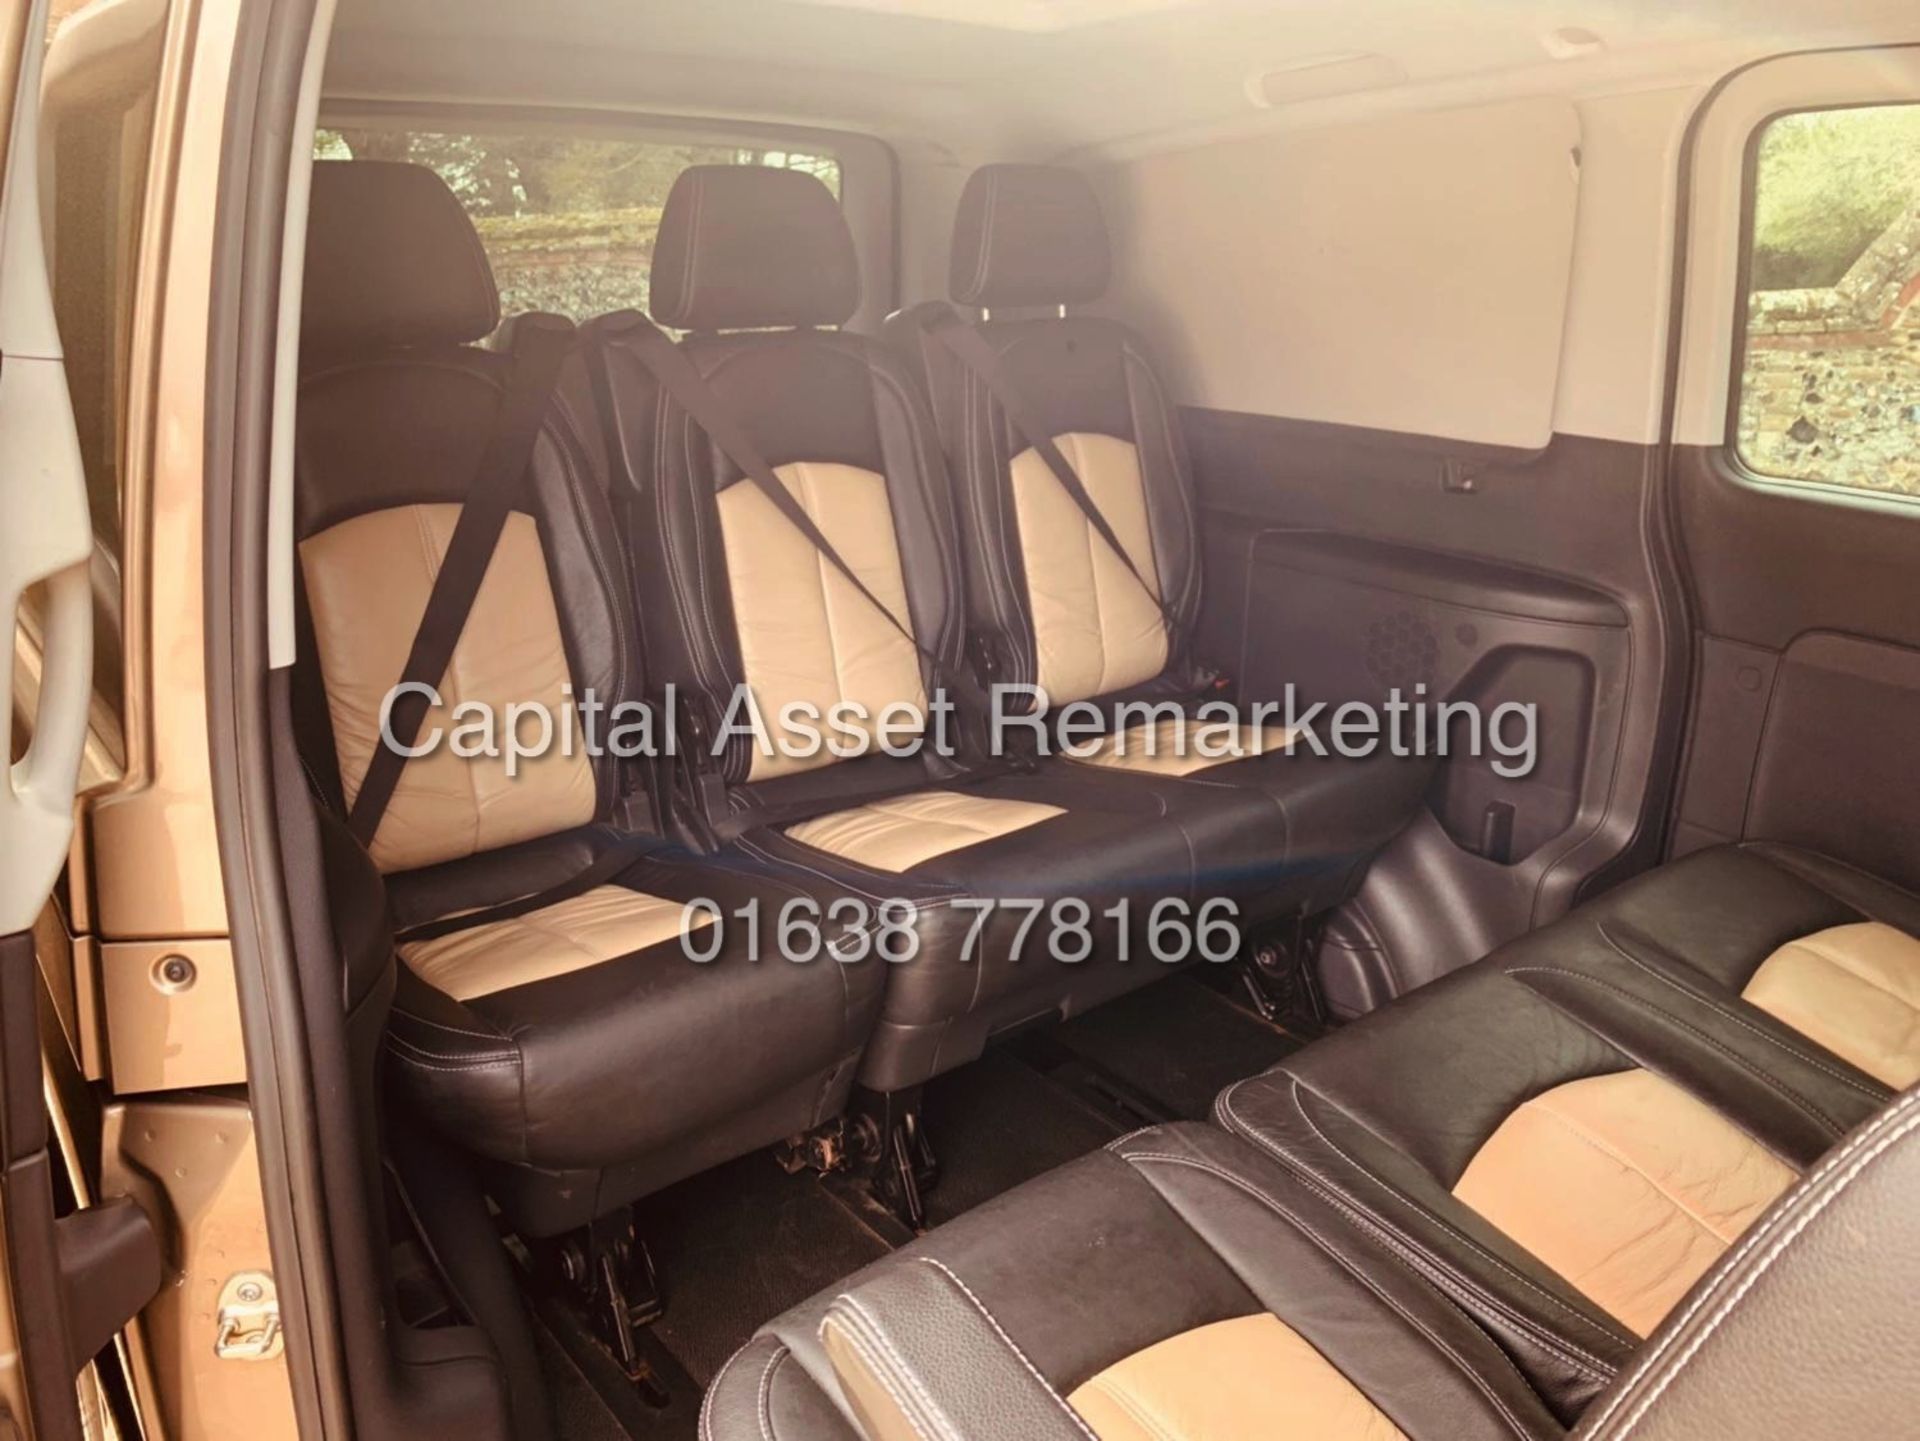 MERCEDES VITO 122CDI *SPORT-X SPEC* 8 SEATER DUALINER LWB (12 REG) 1 OWNER FSH -AIR CON-ALL THE TOYS - Image 17 of 19